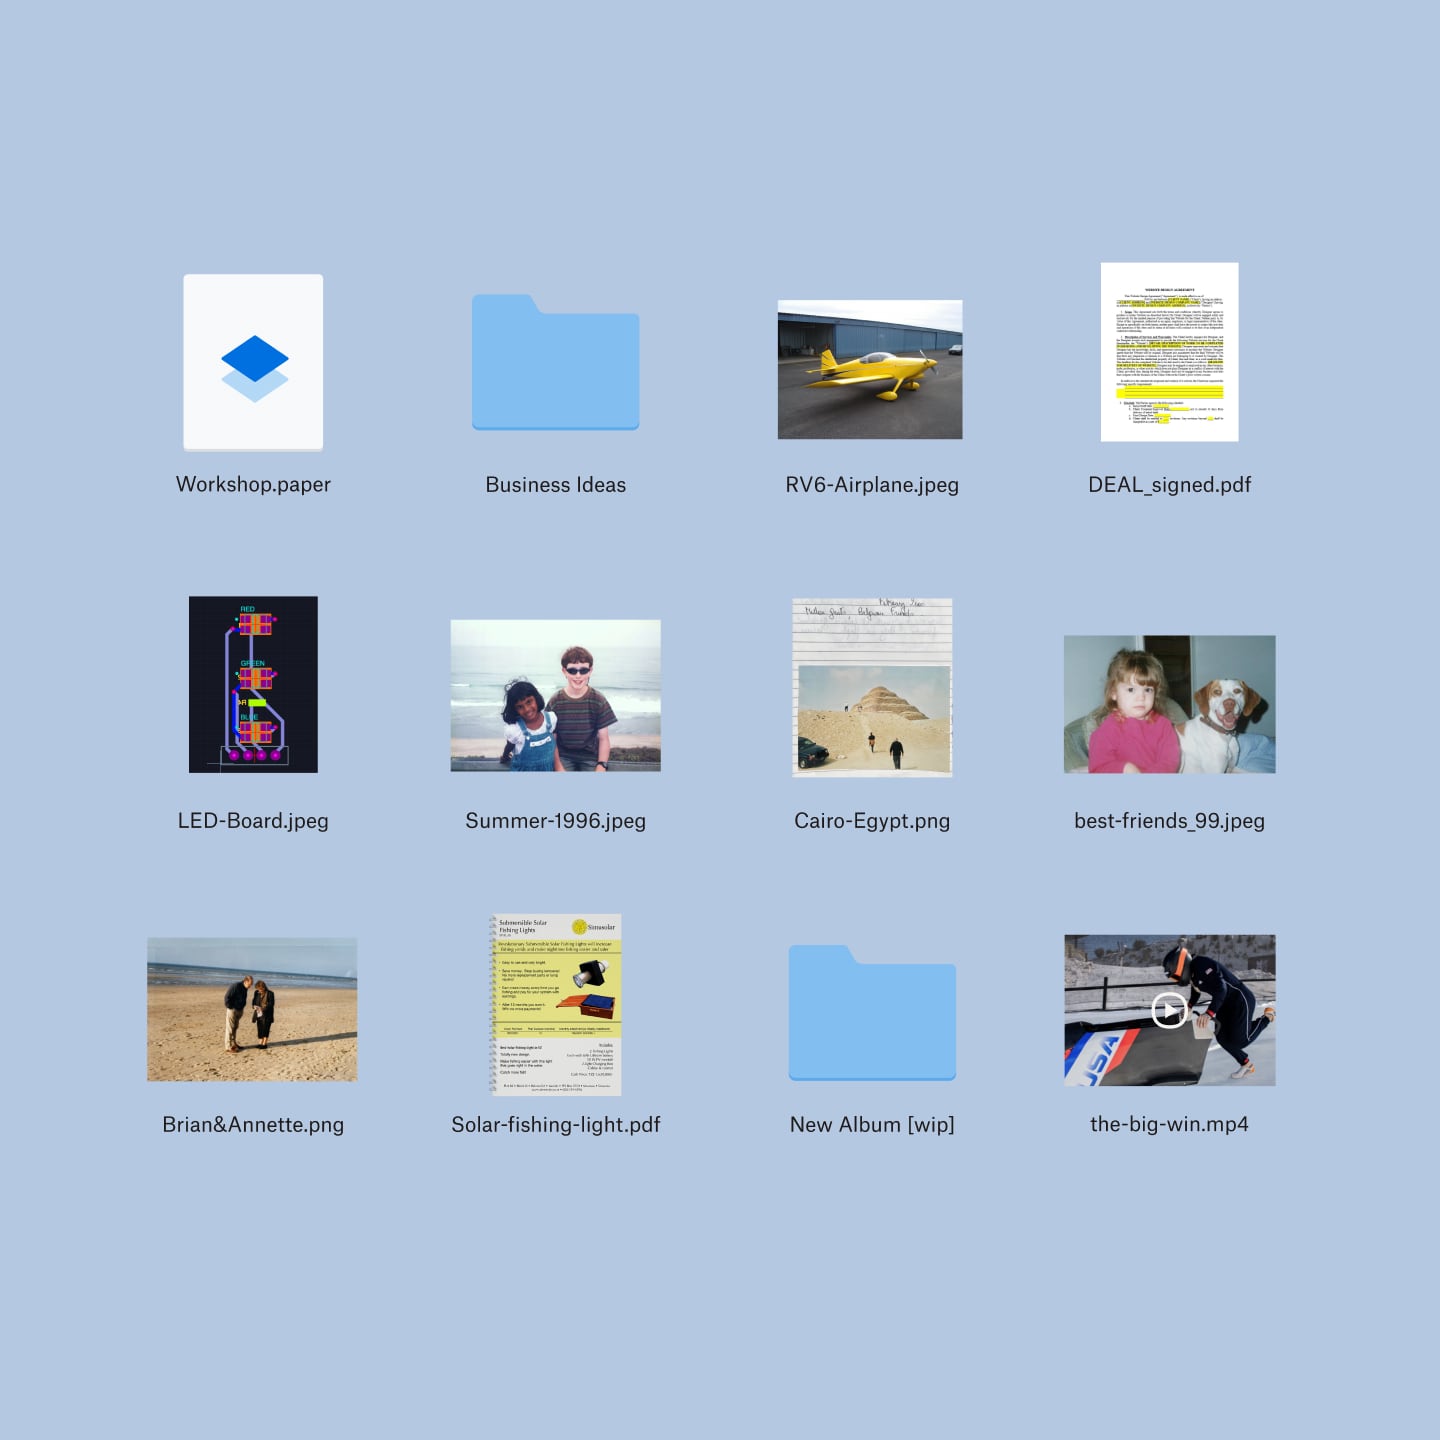 Twelve files and folders in Dropbox, which include images, business ideas and photo albums.